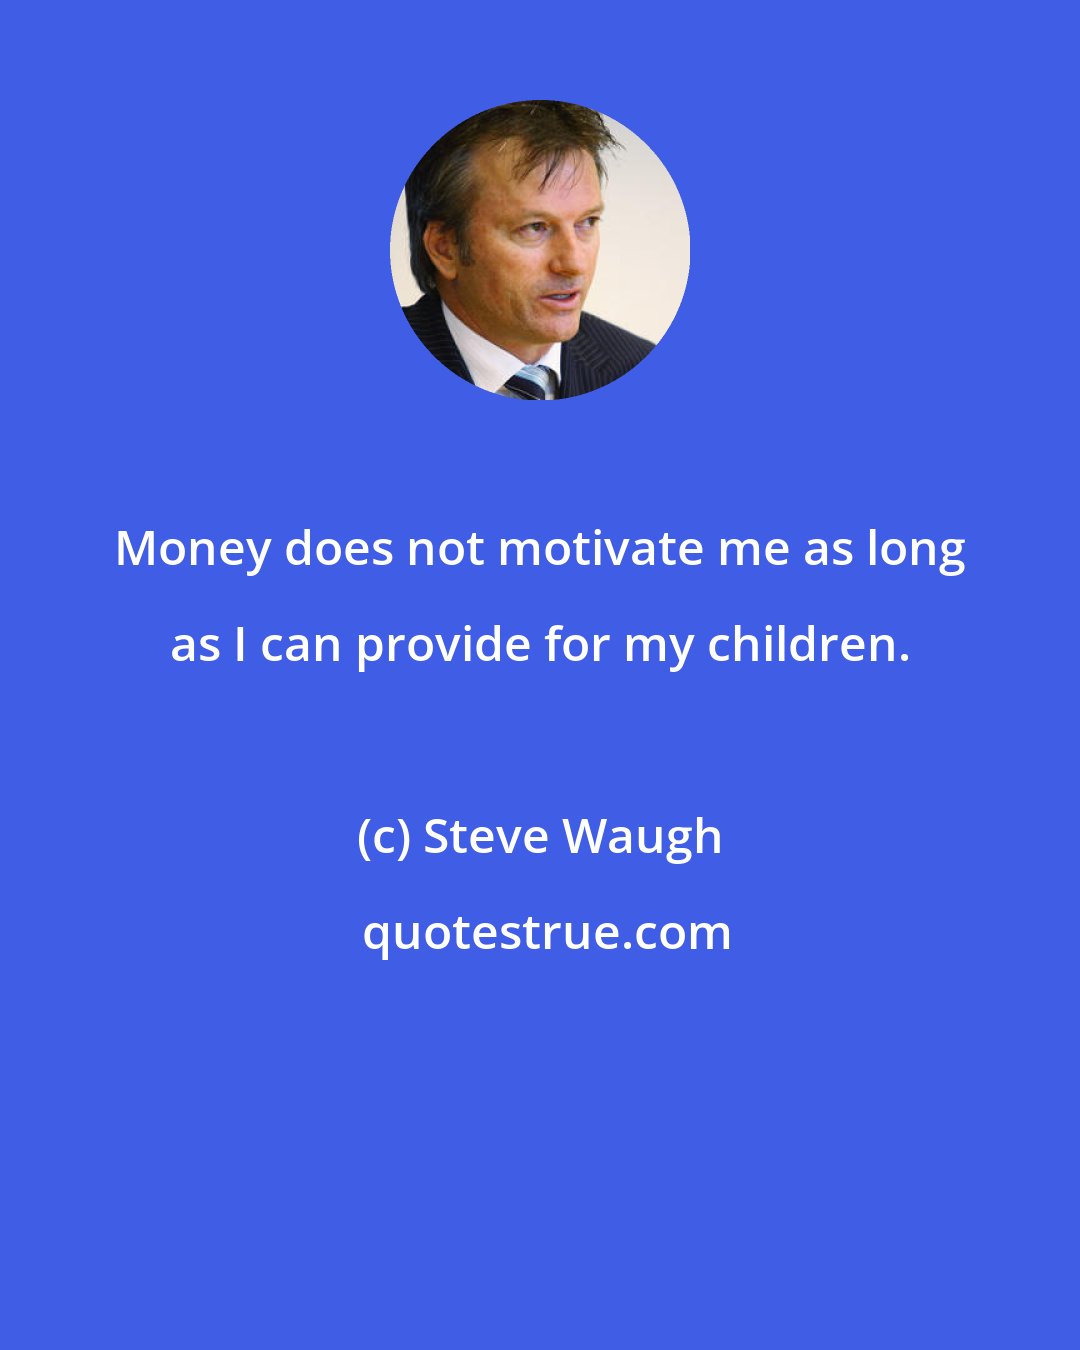 Steve Waugh: Money does not motivate me as long as I can provide for my children.